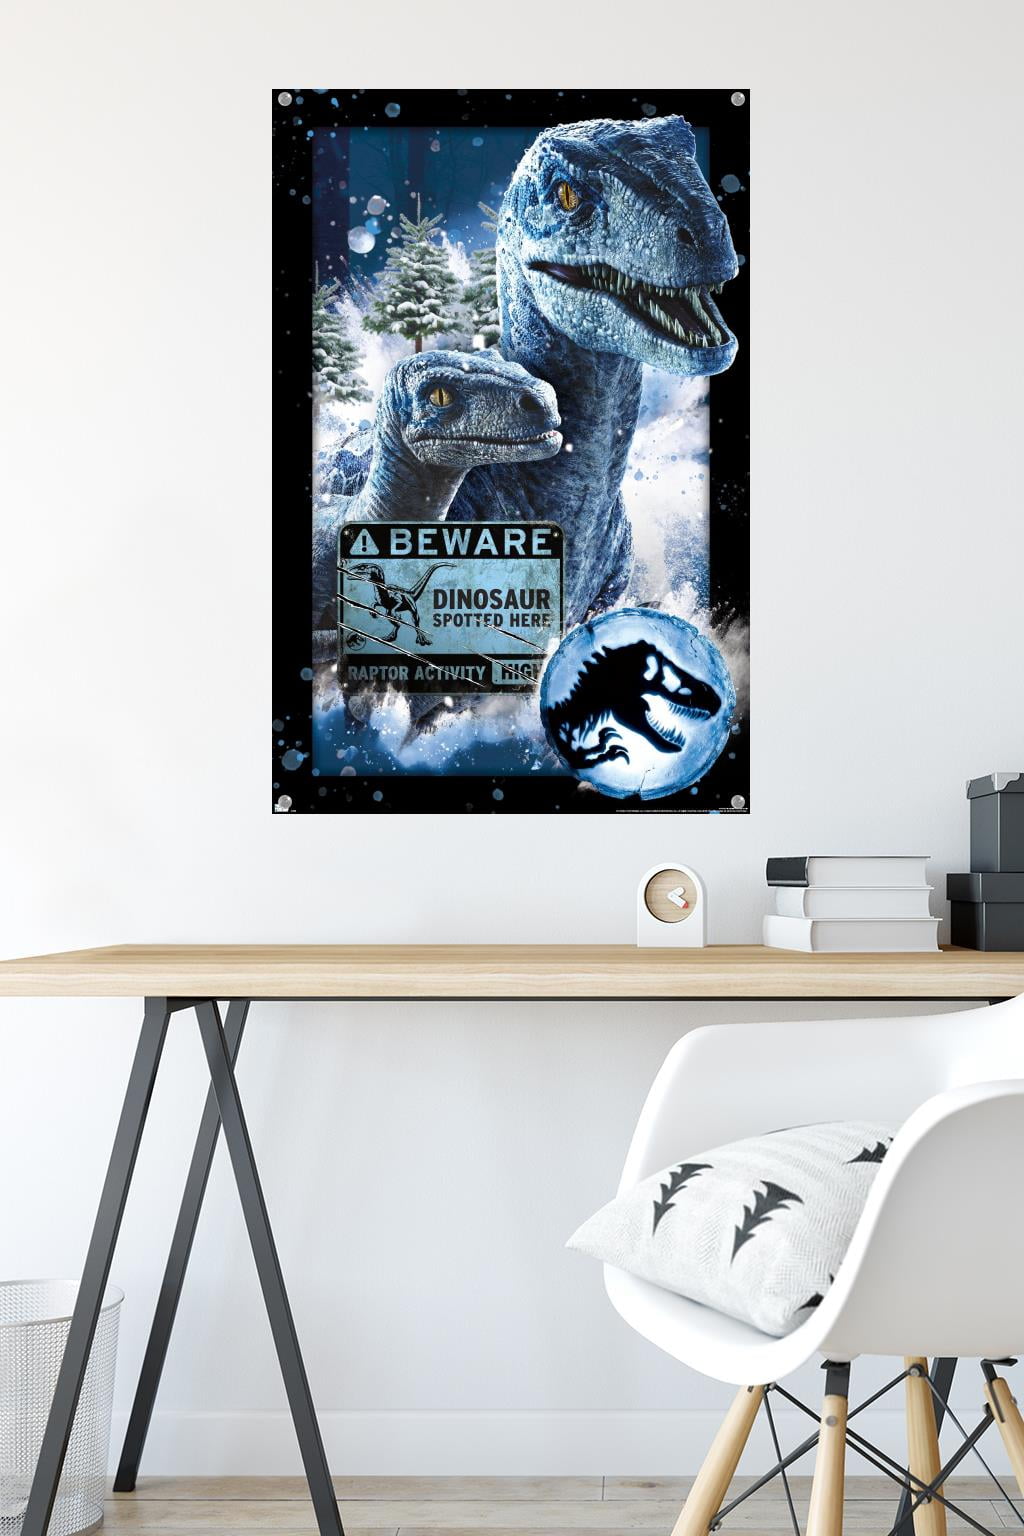 Jurassic Park 3 - Dinosaurs Poster, Size: 22.375 inch x 34 inch